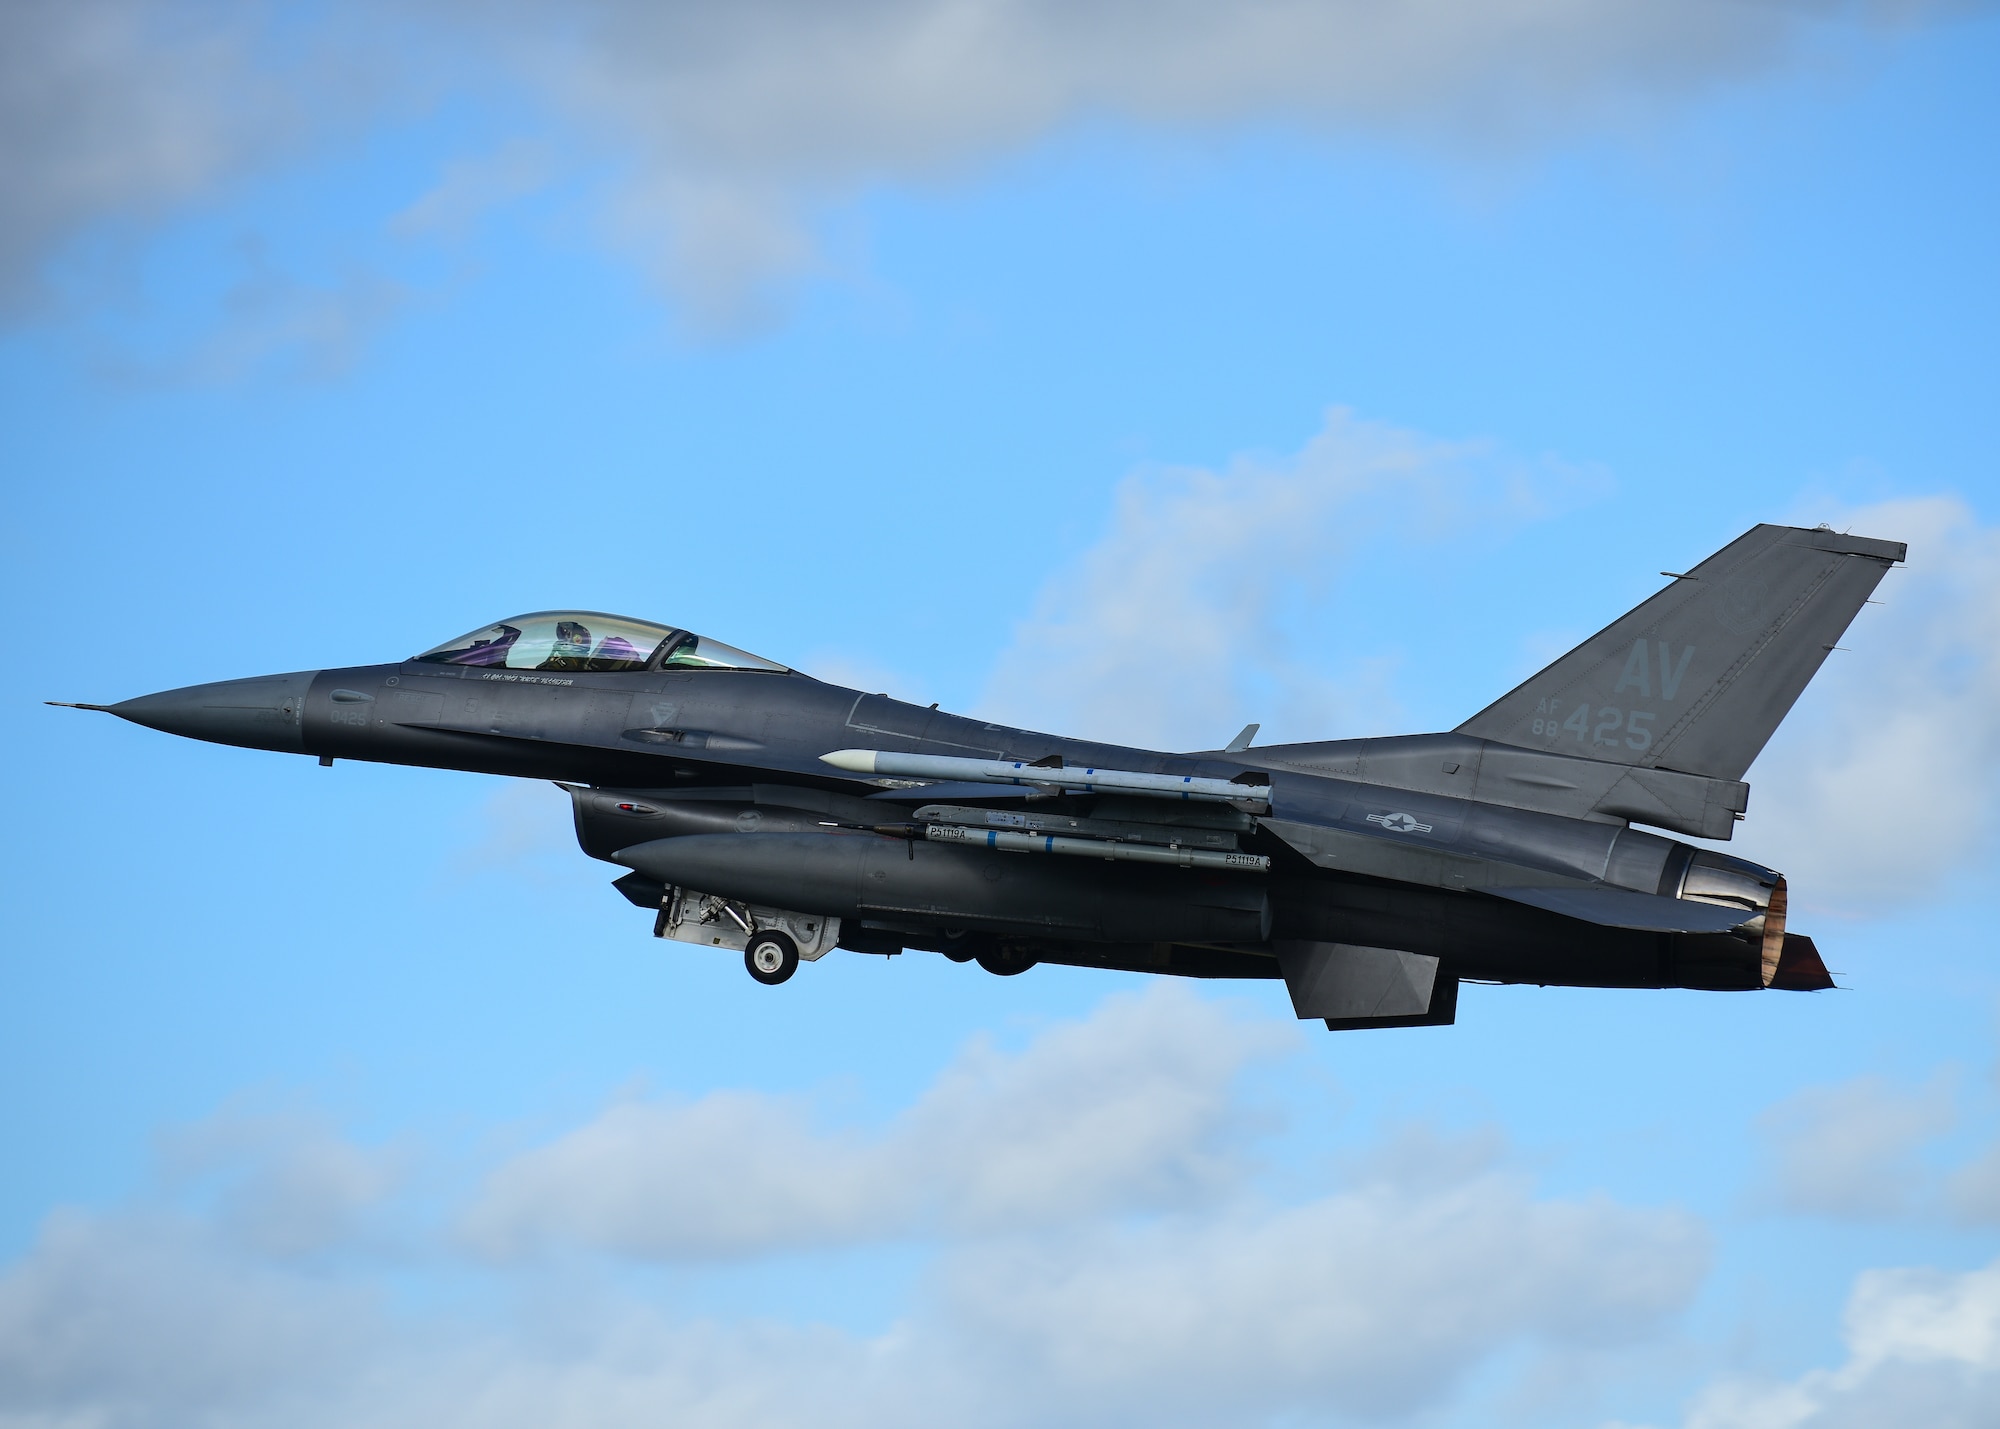 A U.S. Air Force F-16D Fighting Falcon assigned to the 555th Fighter Squadron from the 31st Fighter Wing, Aviano Air Base, Italy, takes flight